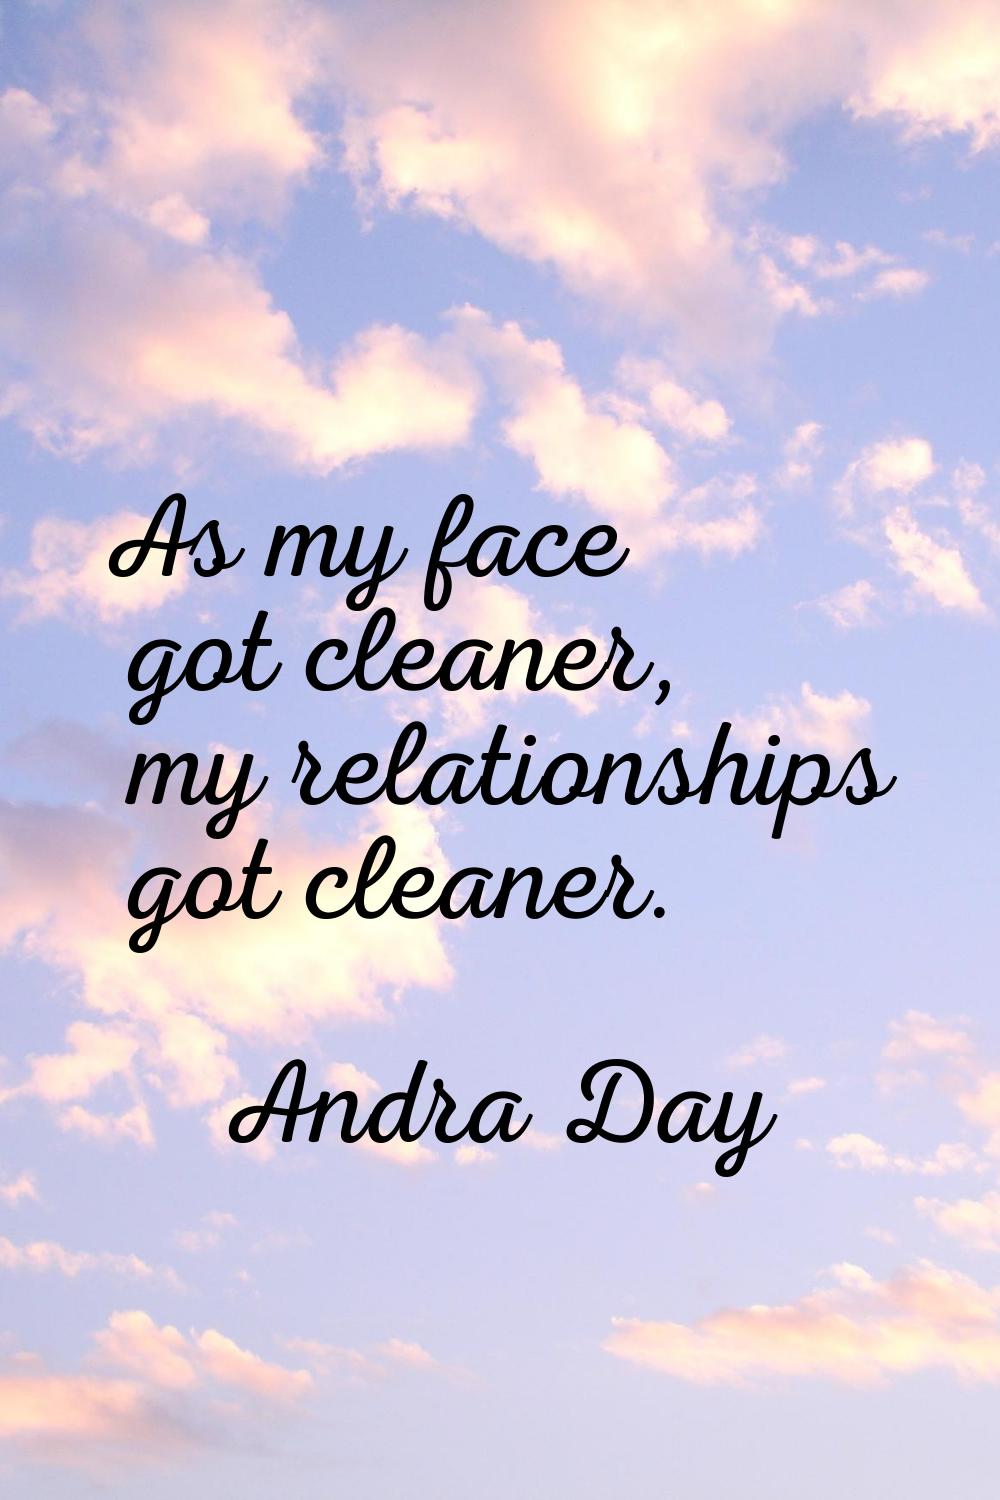 As my face got cleaner, my relationships got cleaner.